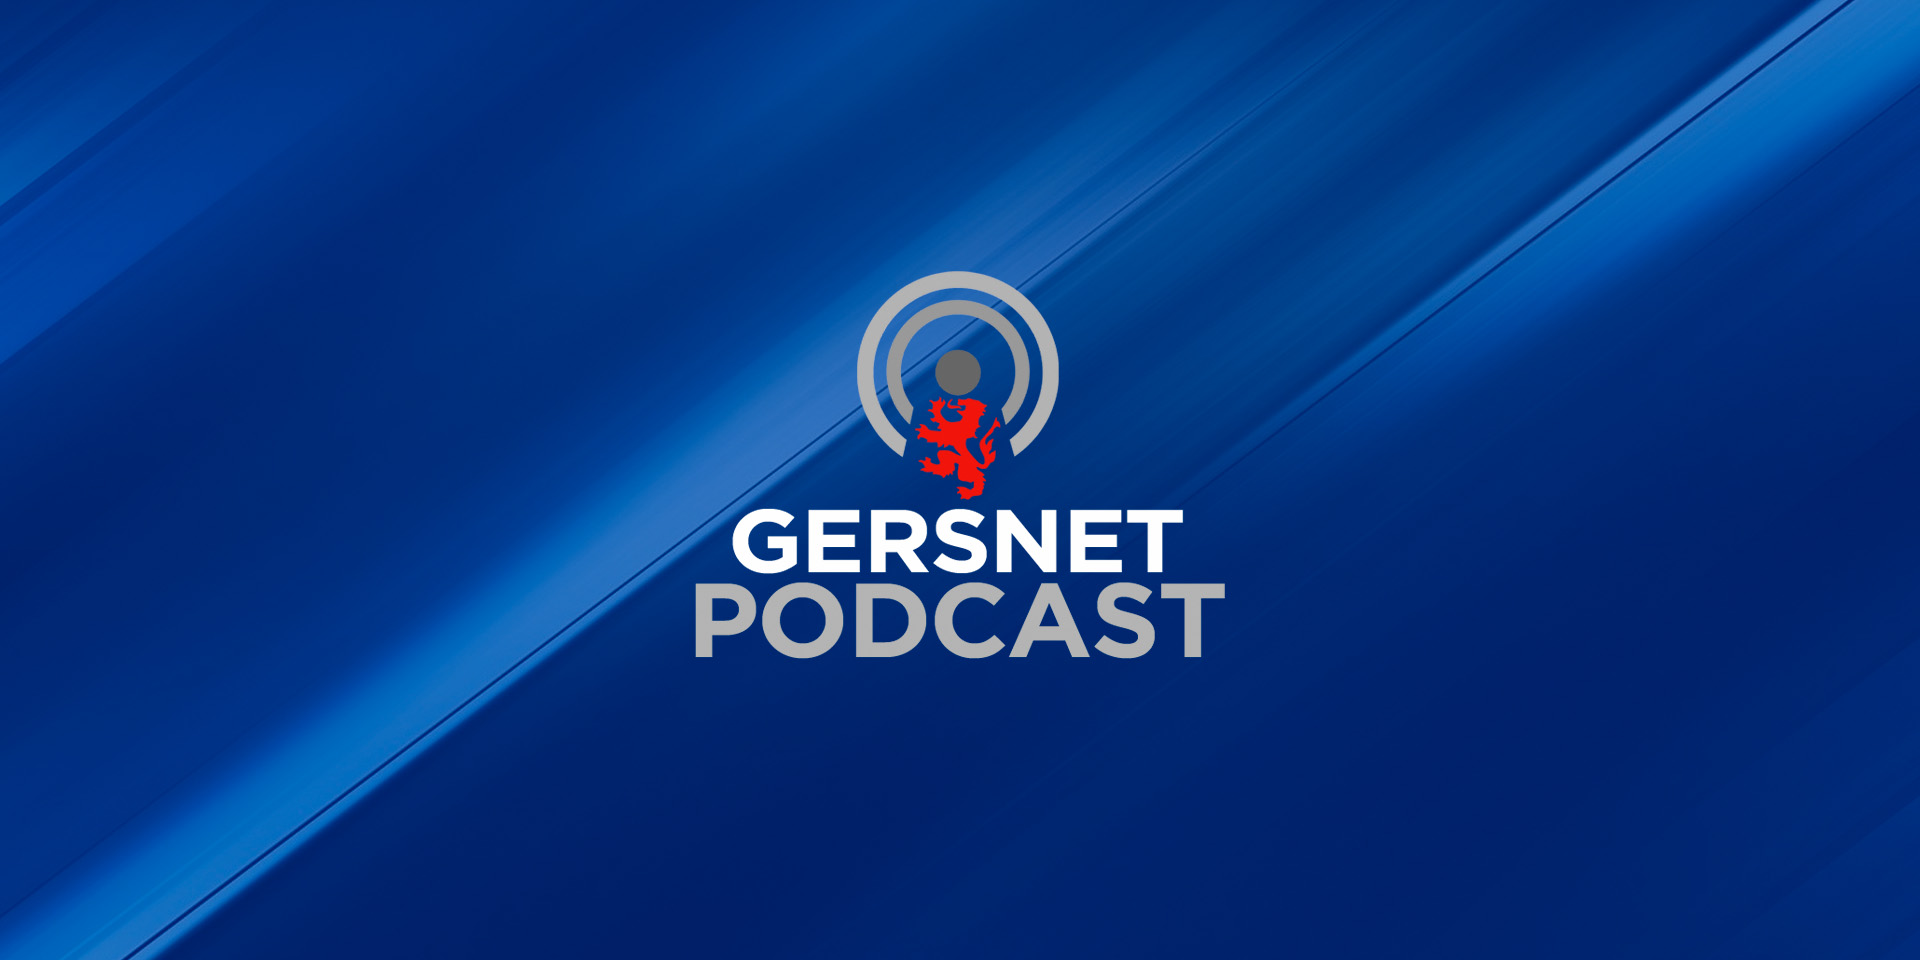 Gersnet Podcast 327 - Ross County Preview